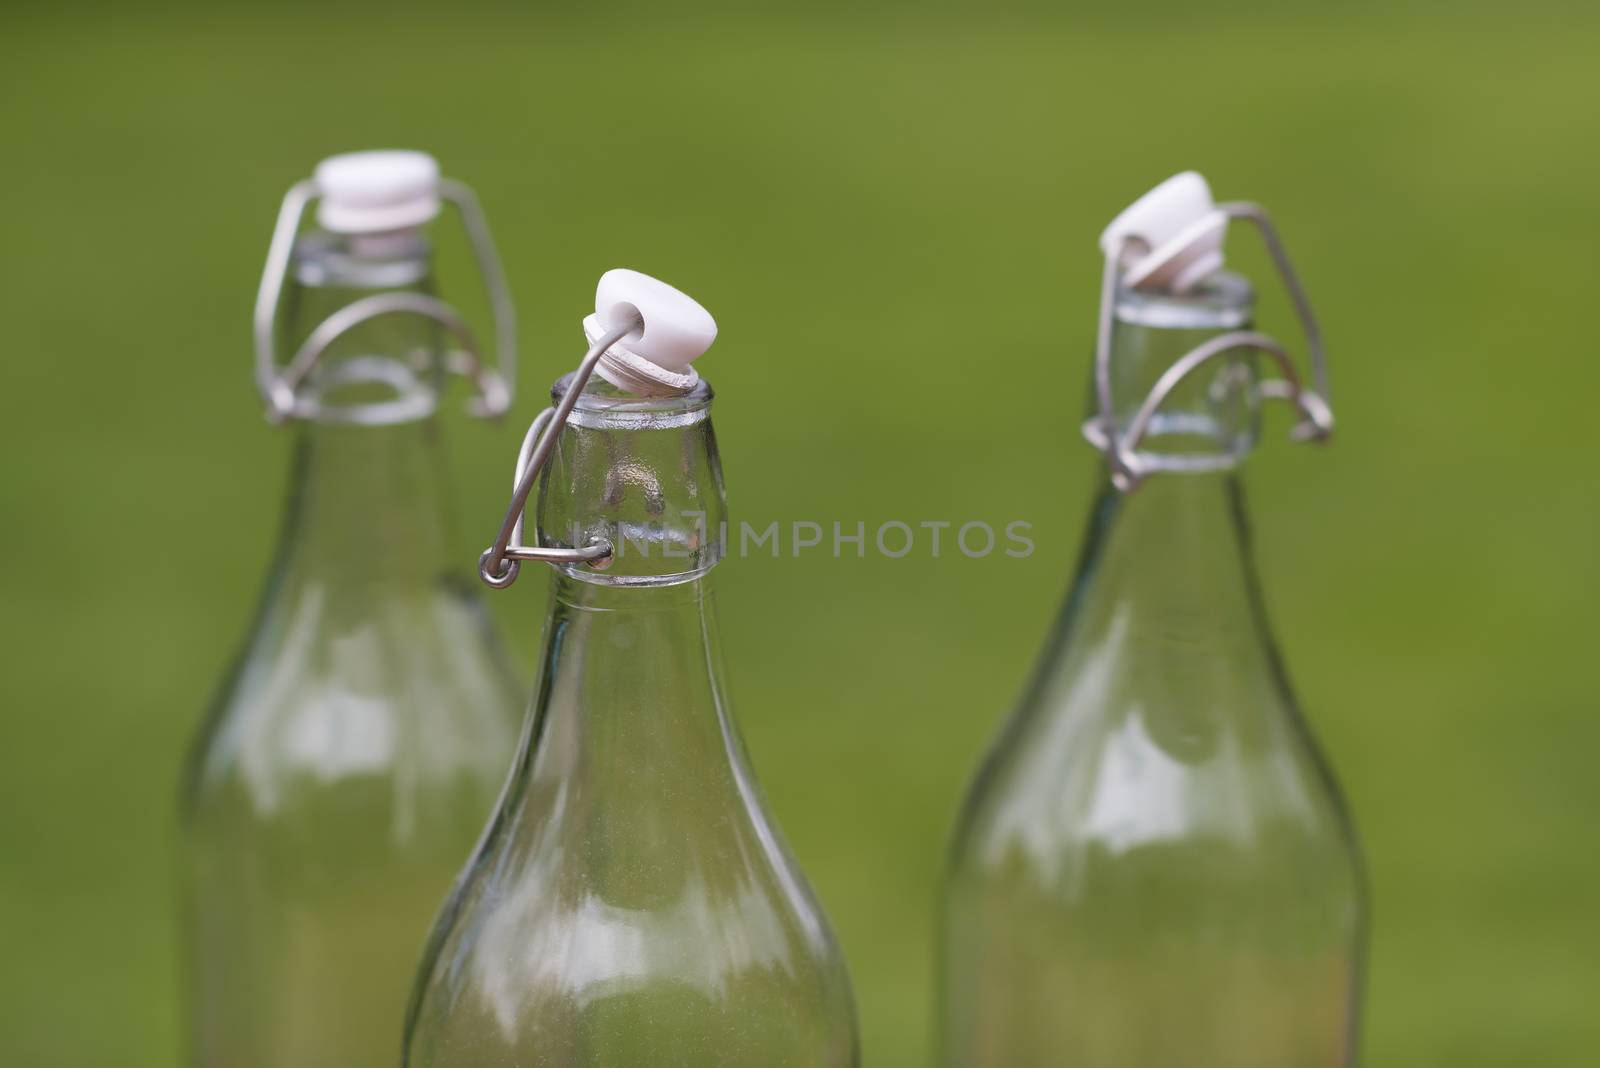 Three old-fashioned authentic milk bottles
 by Tofotografie